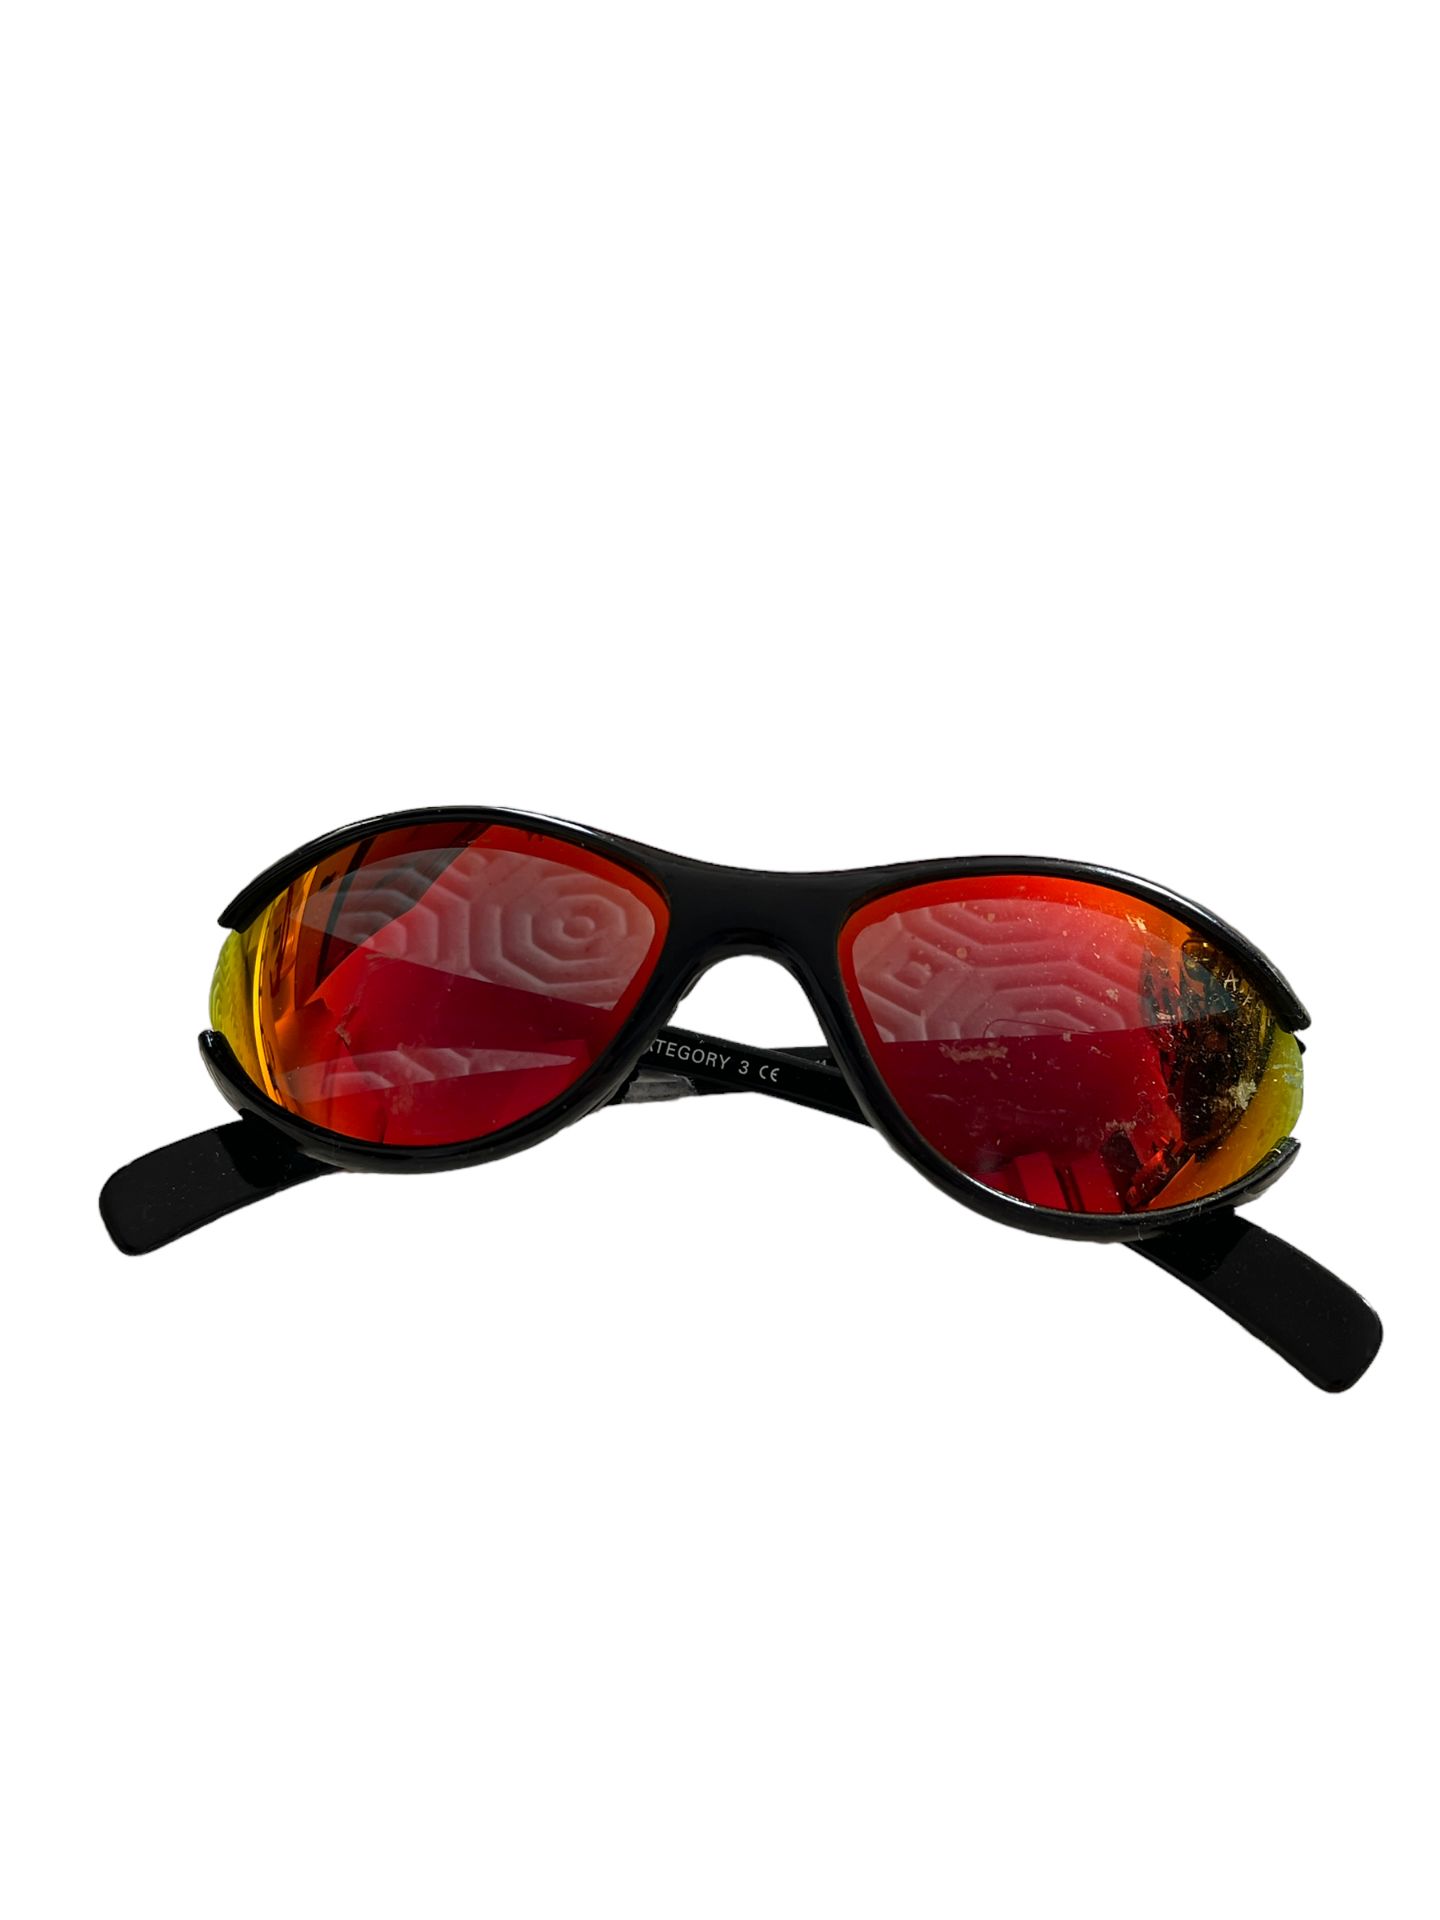 Apex Glasses with case RR£38.00 surplus stock - Image 3 of 4